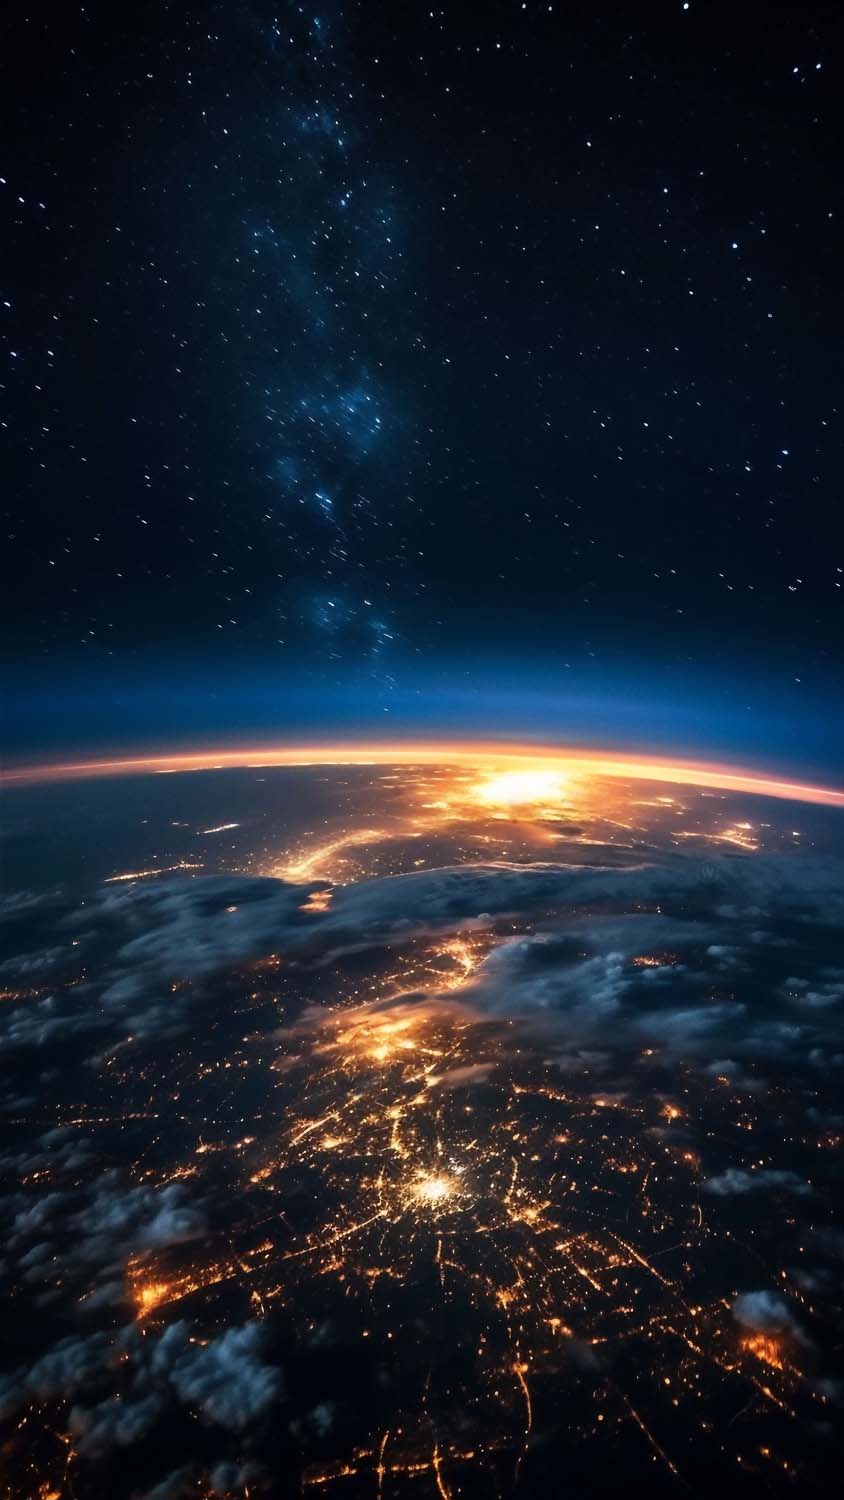 City Lights from Space iPhone Wallpaper 4K